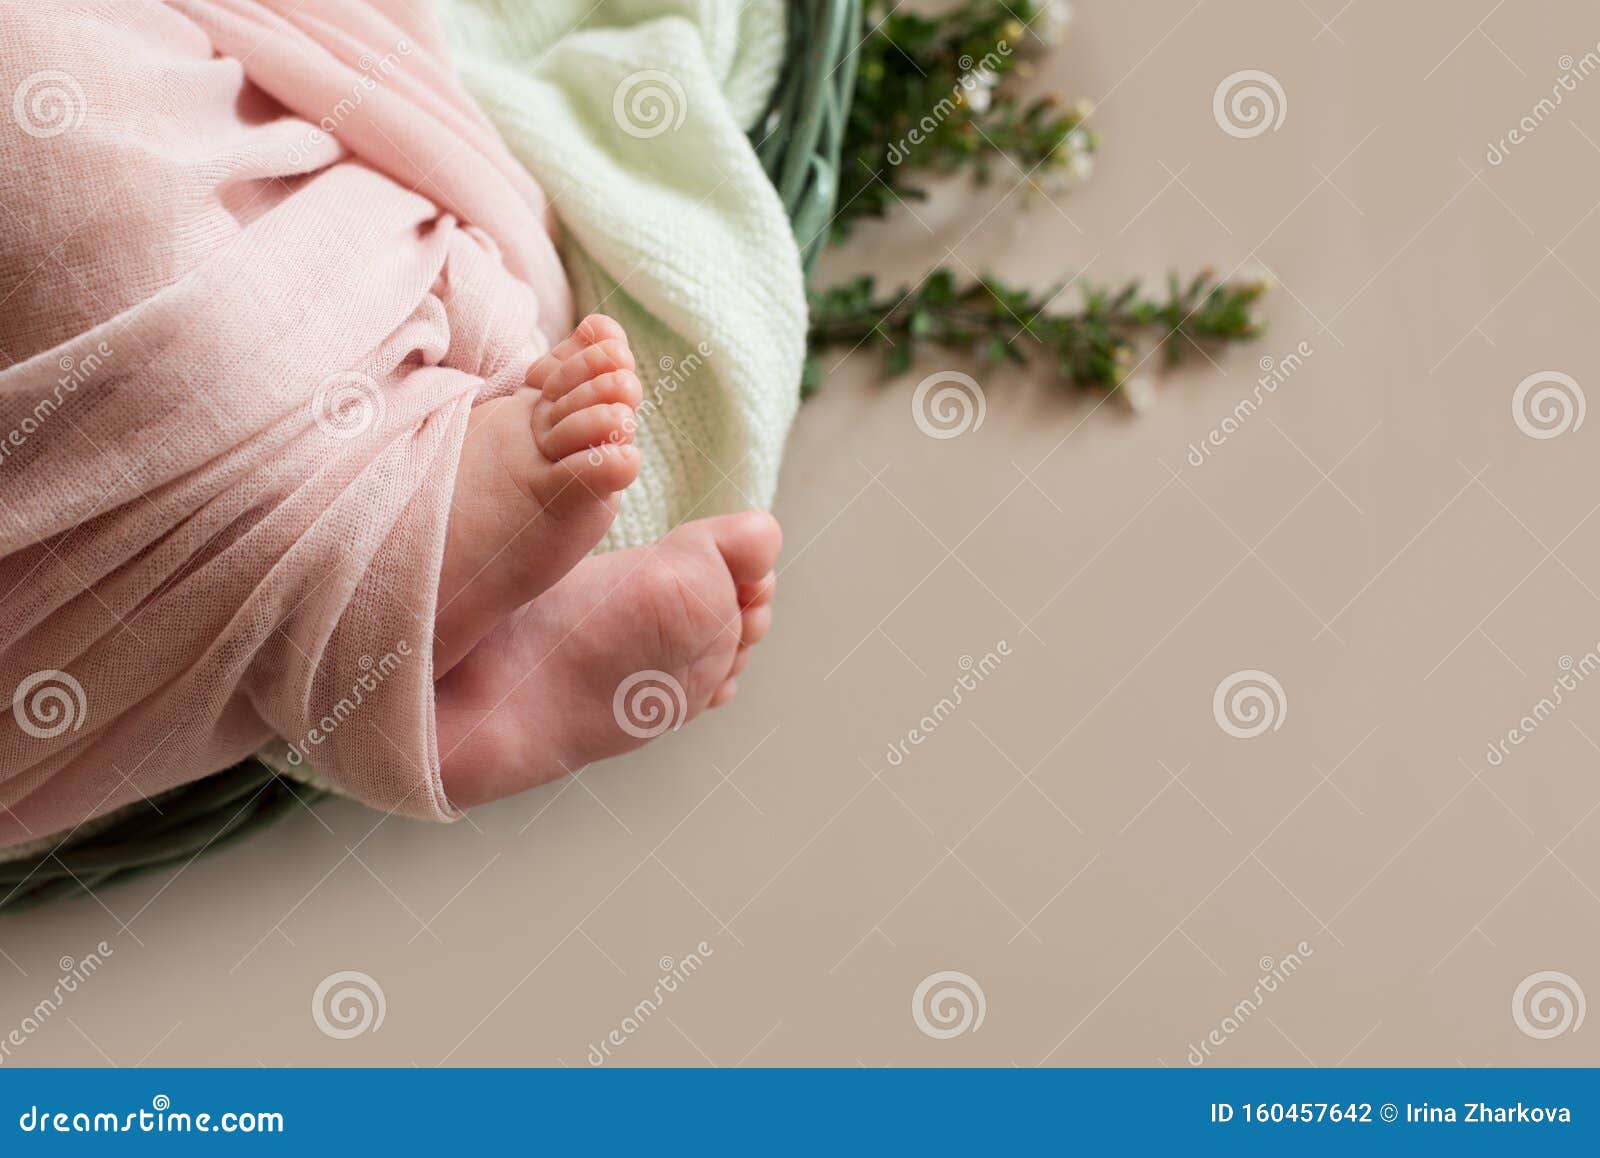 Feet Of The Newborn Baby With Flower Fingers On The Foot Maternal